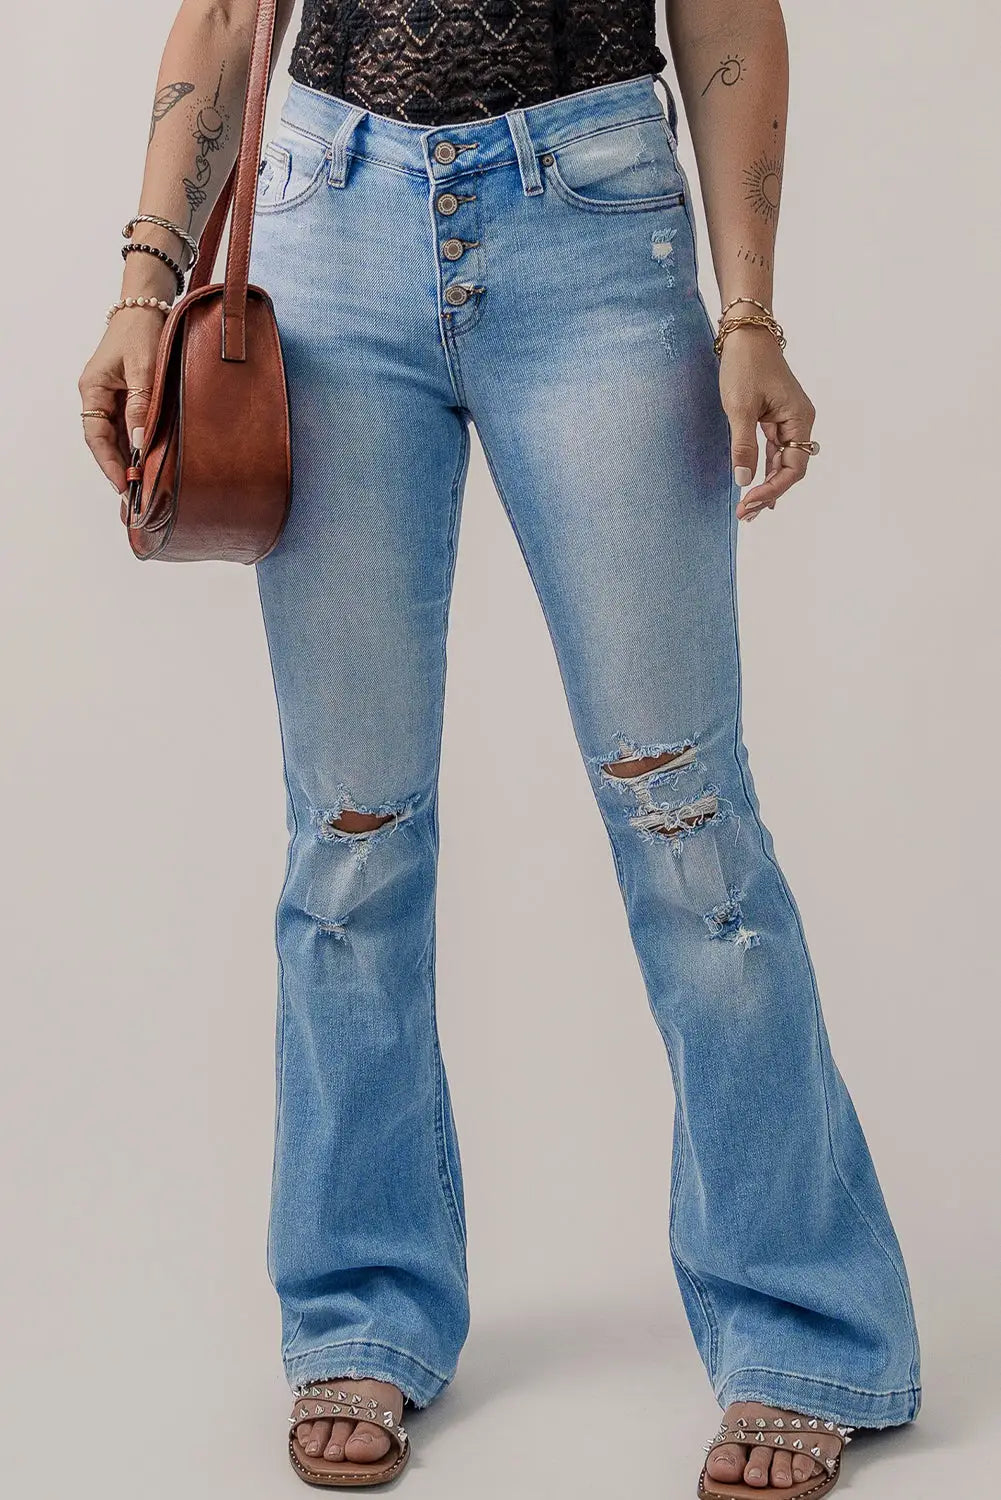 Beau blue high waist button front ripped flare jeans - 10 71% cotton + 27.5% polyester + 1.5% elastane